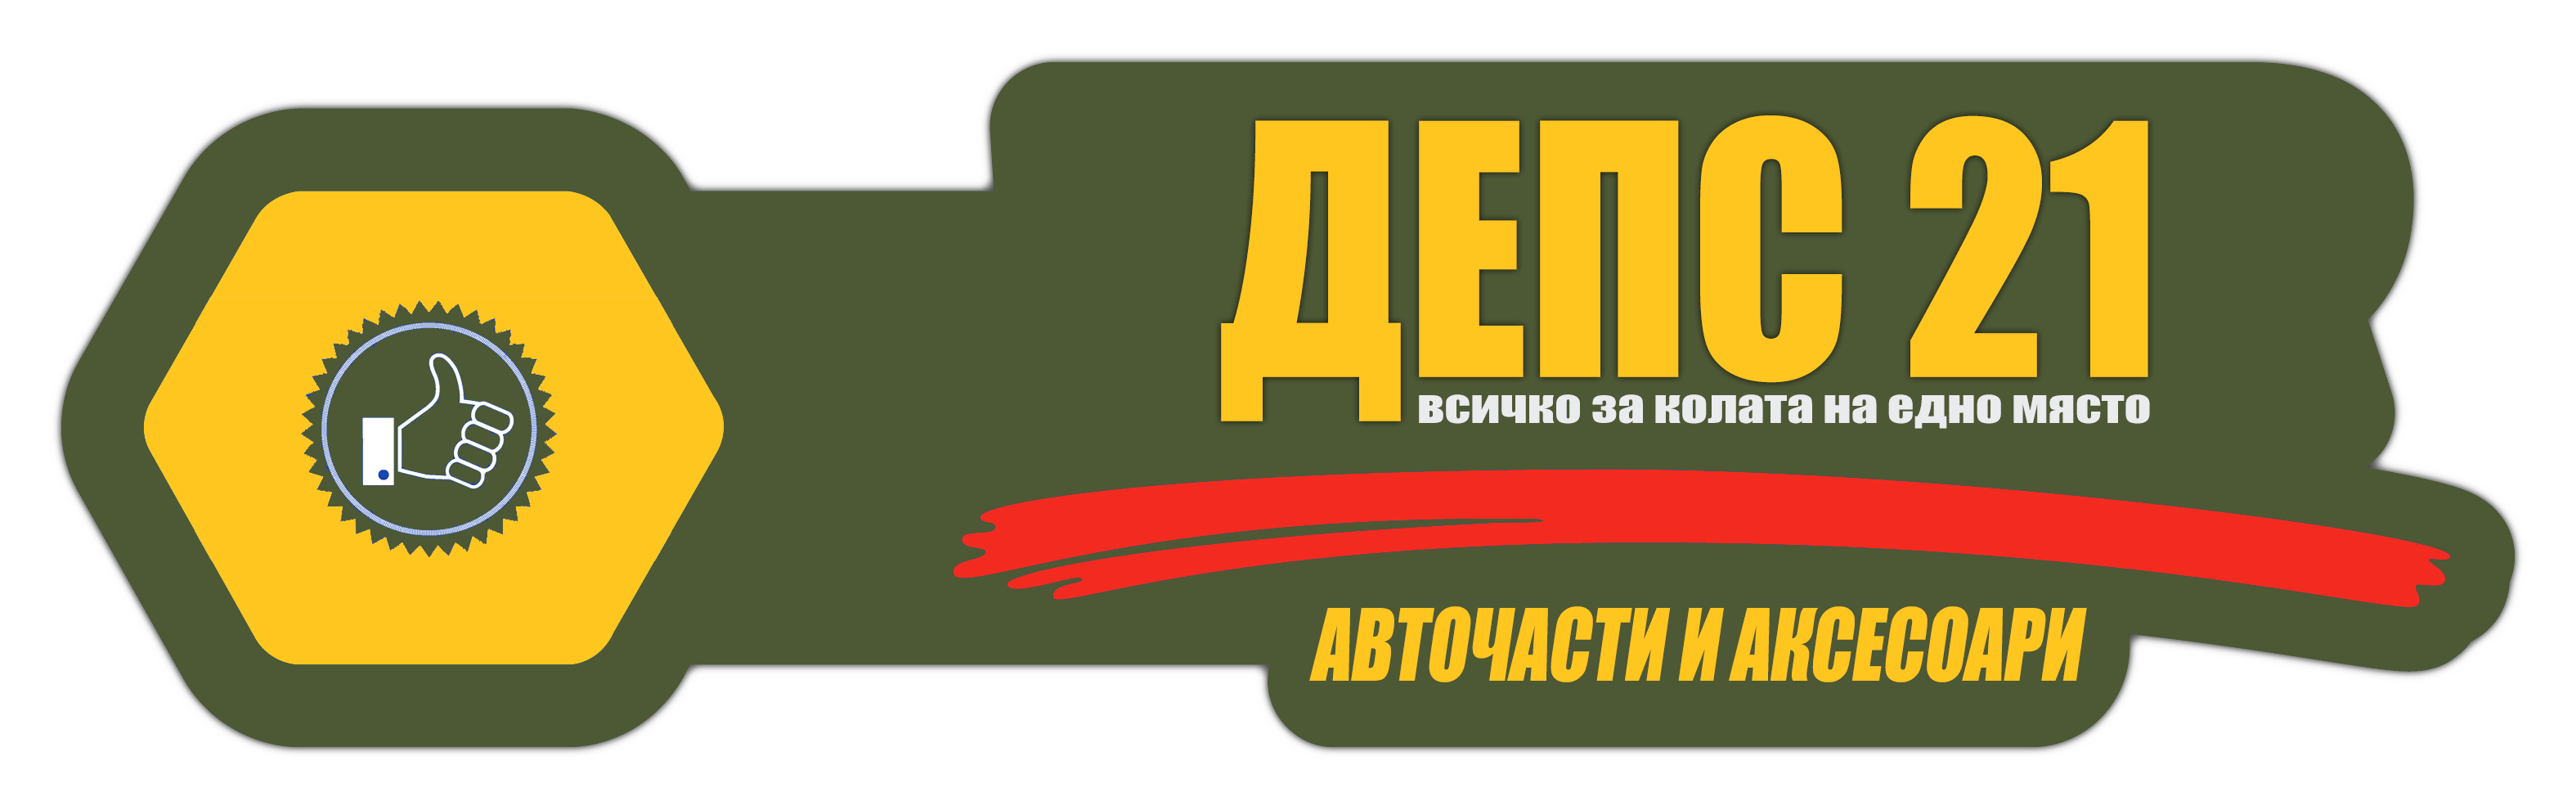 ДЕПС 21